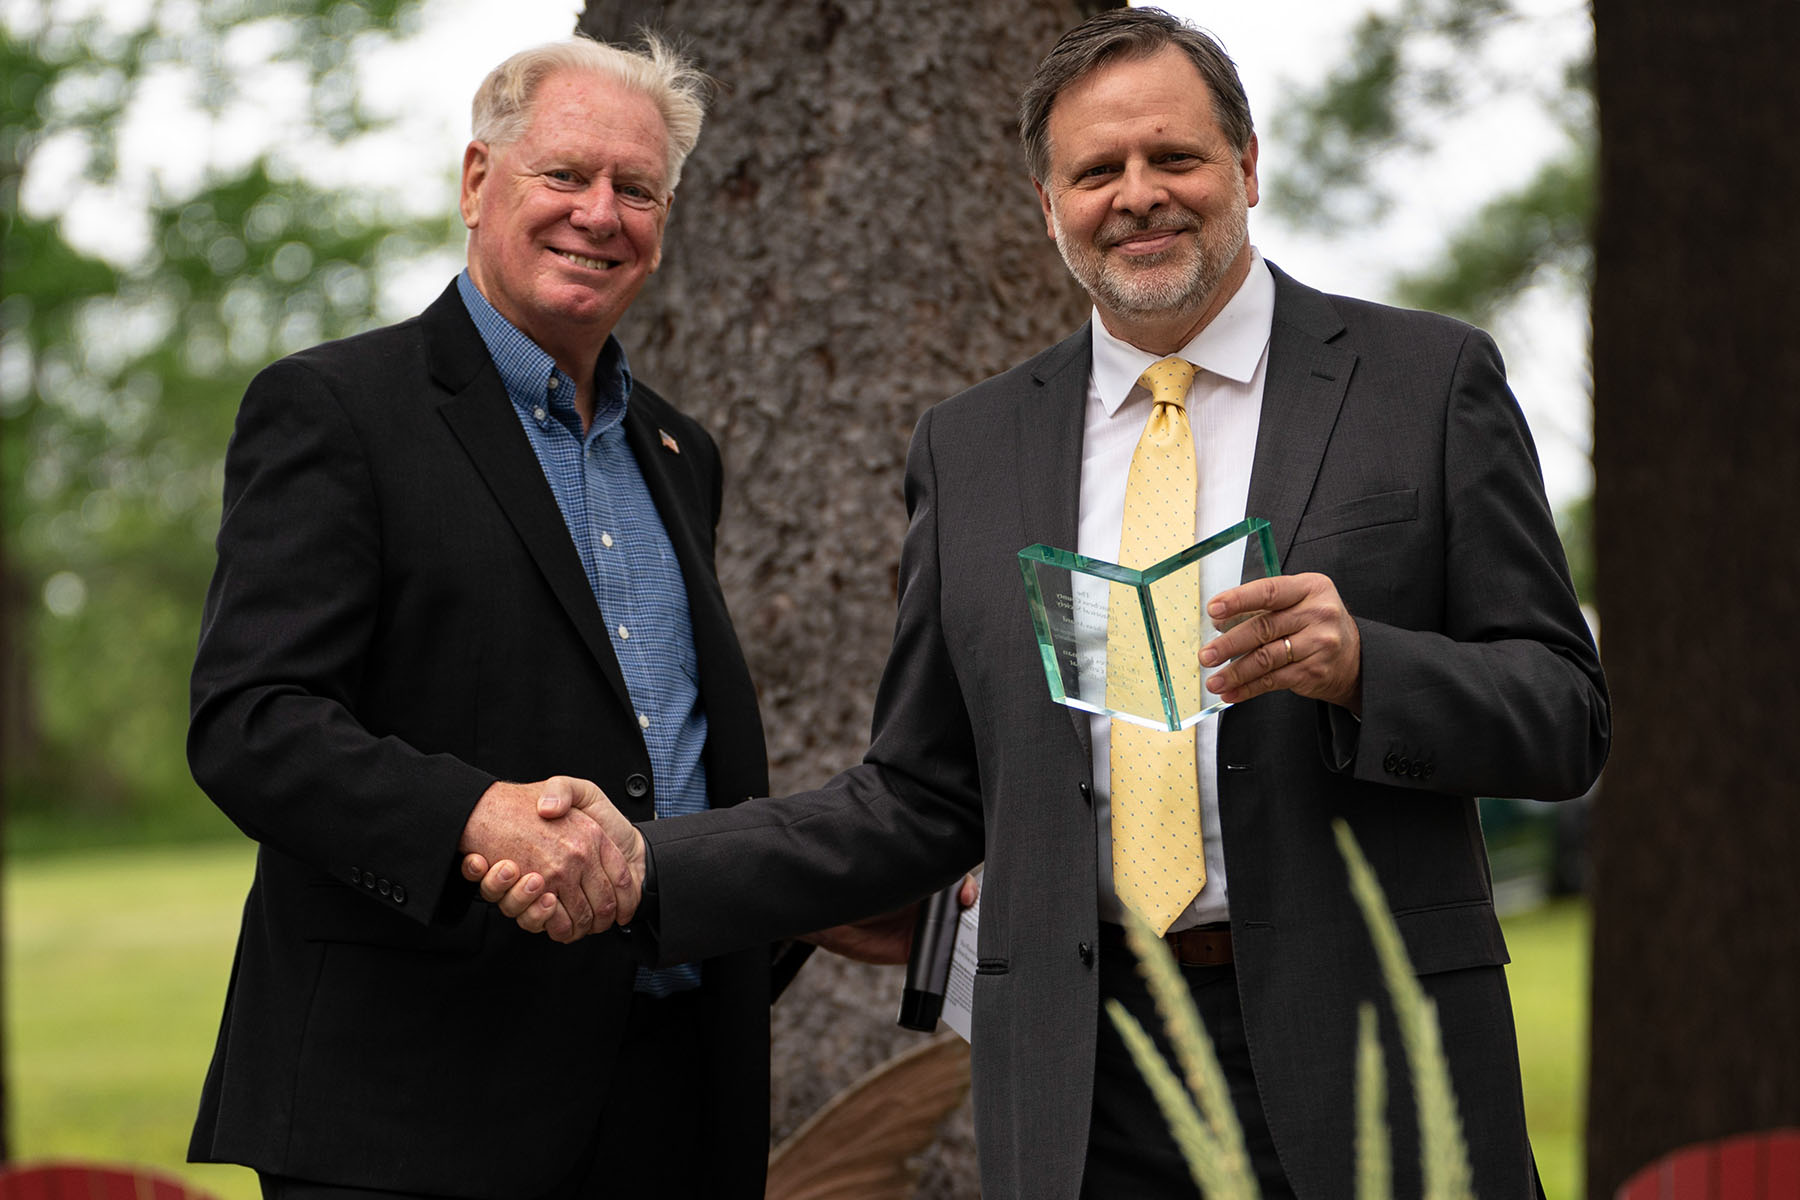 Two men standing in front of a tree shaking hands, one holding a clear glass award shaped like a book